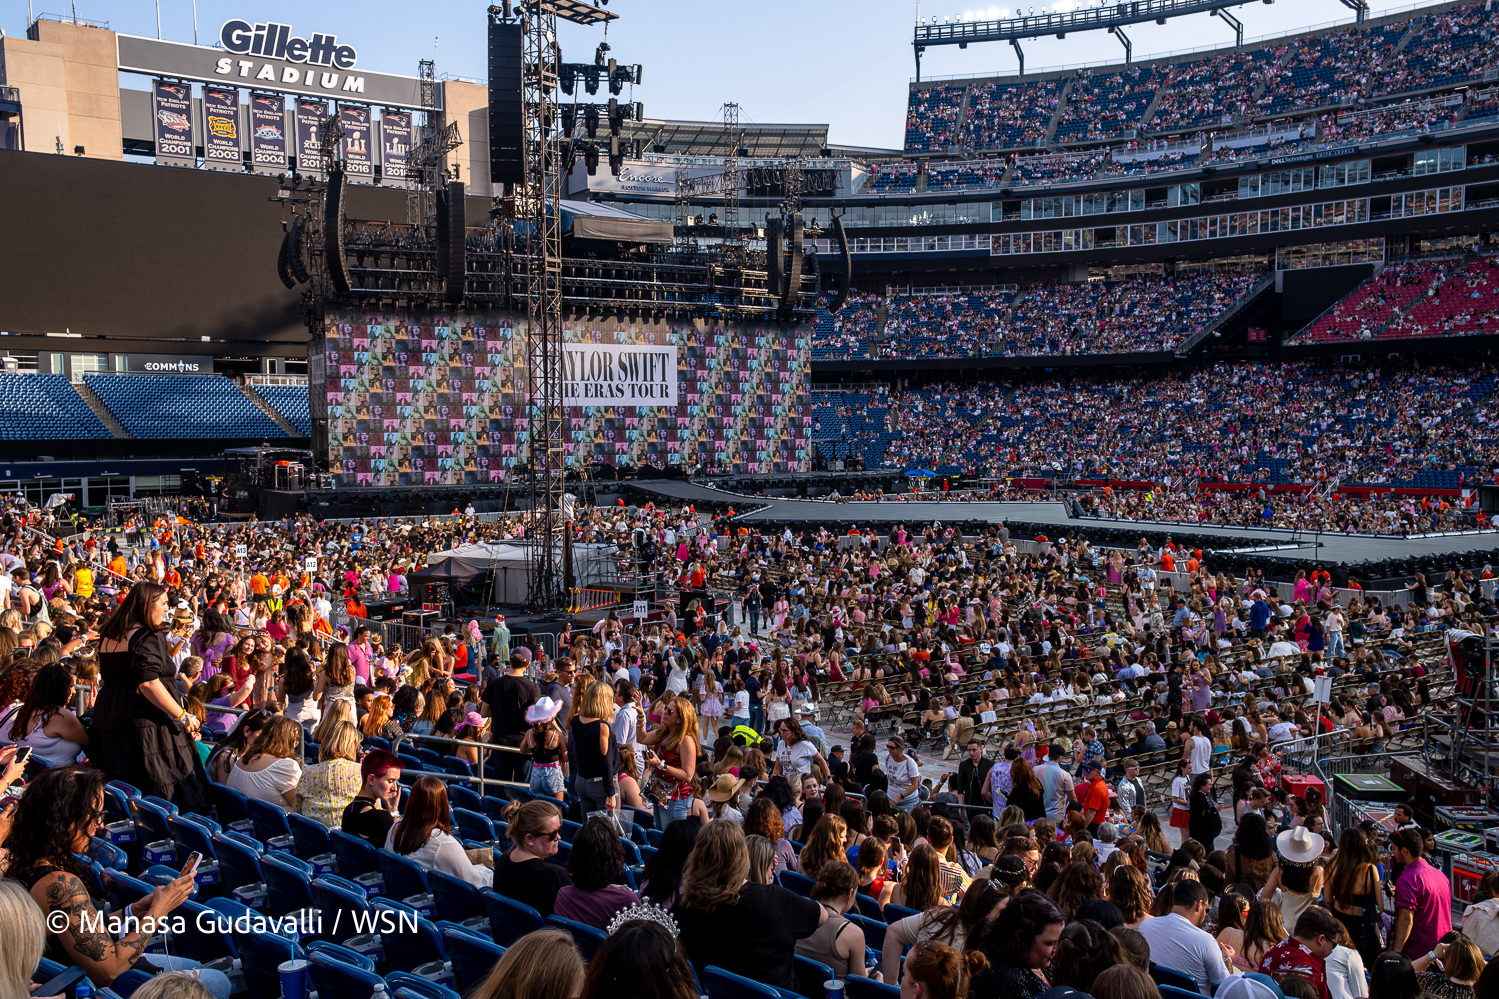 A large crowd fills the floor and stands of Gillette Stadium, surrounding a stage and a tower at the center of the stadium. The stage has a background featuring colorful photos of Taylor Swift, with the text “TAYLOR SWIFT THE ERAS TOUR” overlaid in black on a white rectangle. A sign reading “Gillette Stadium” overlooks the crowd from the top of the stadium.